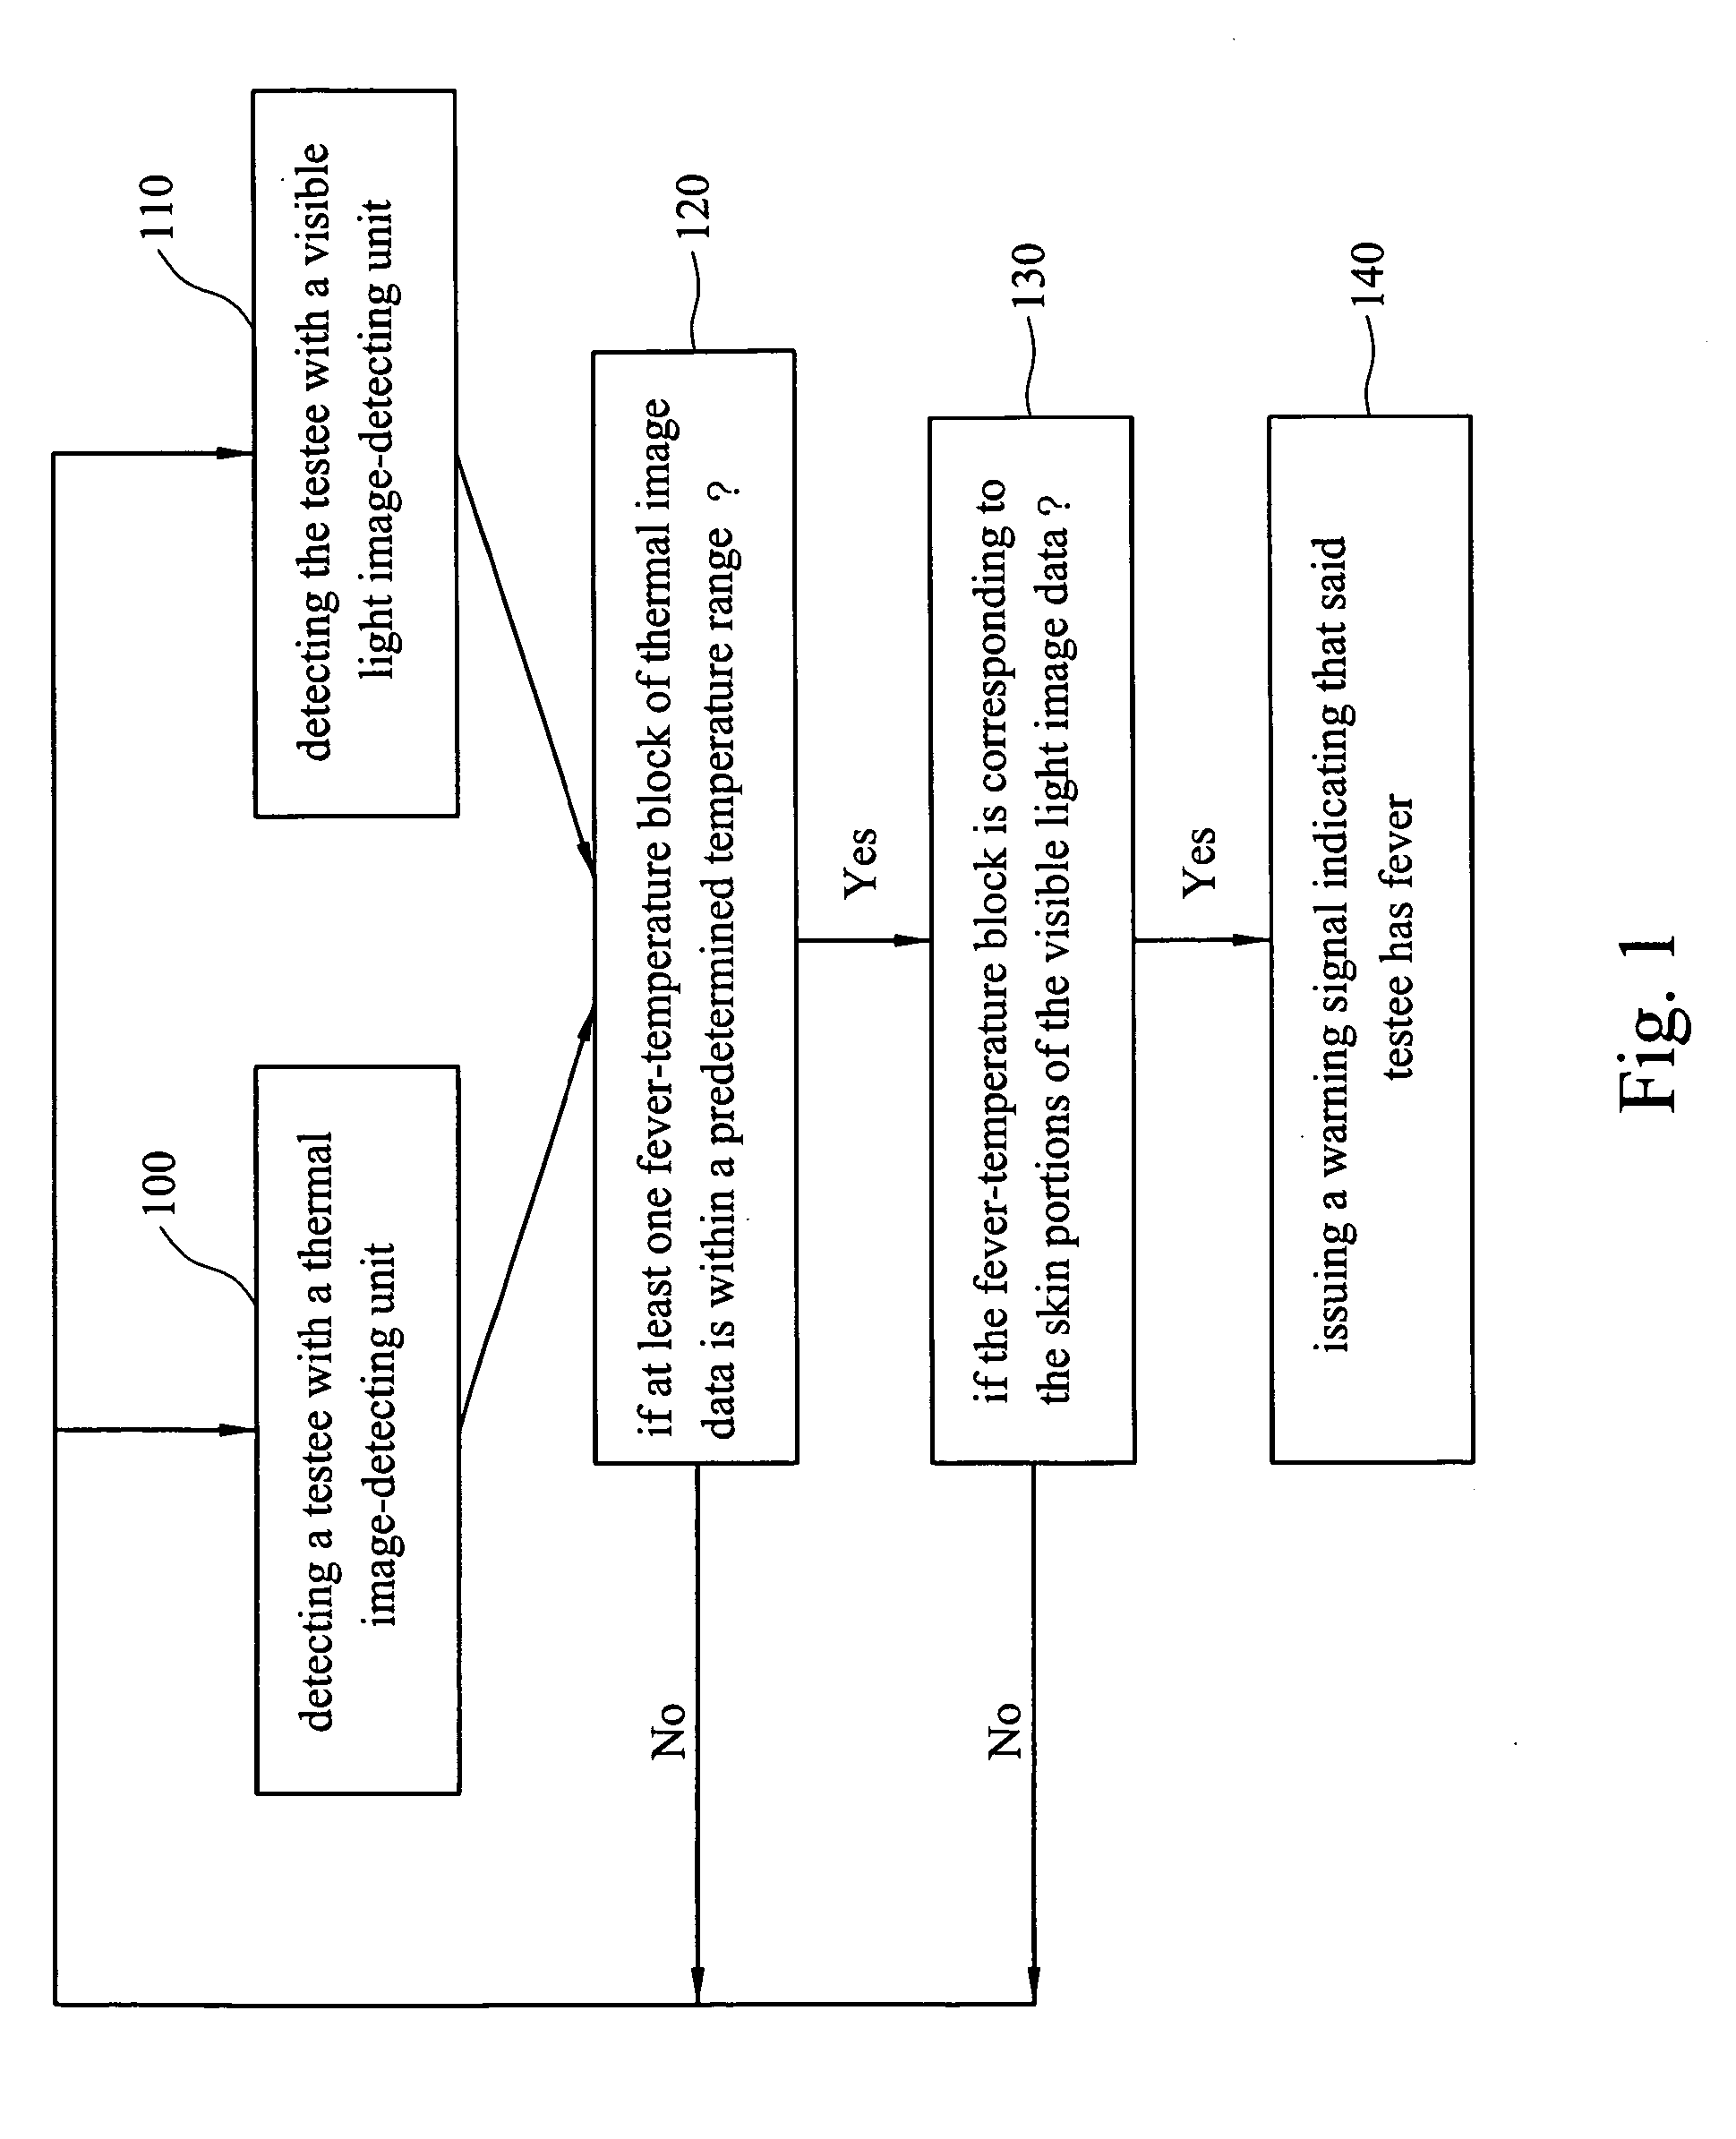 Method and system for performing fever triage